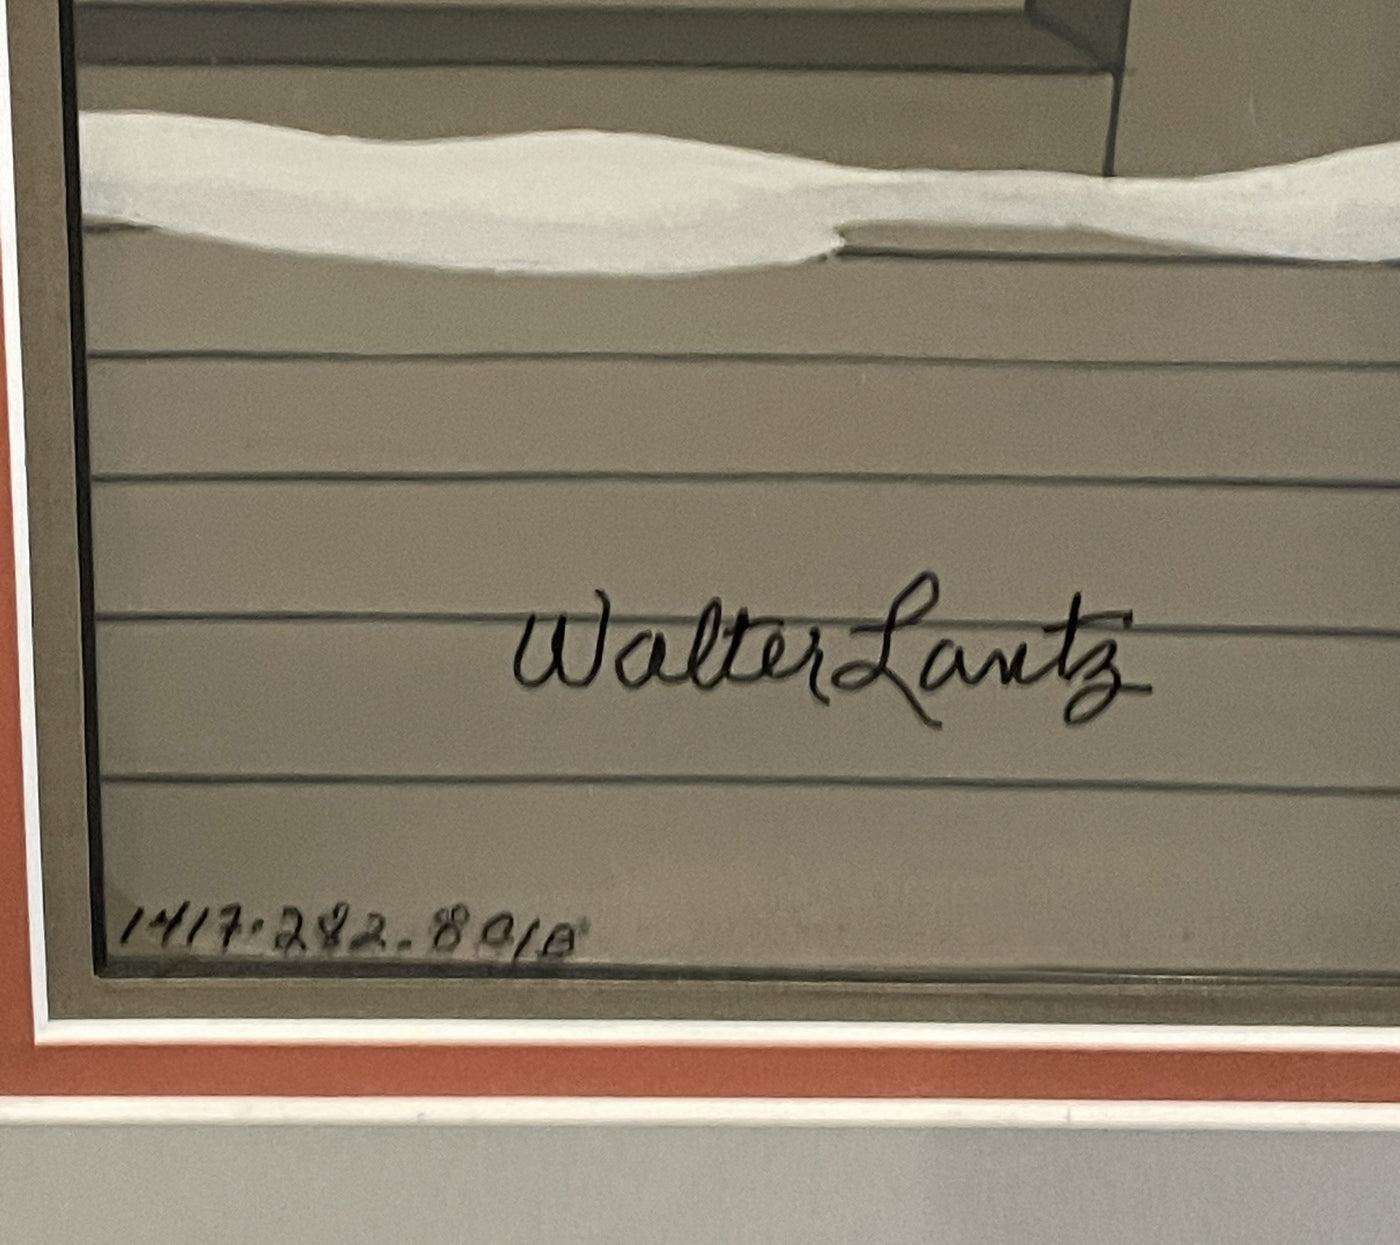 Original Walter Lantz Production Cel on Production Background of Chilly Willy, Signed by Walter Lantz